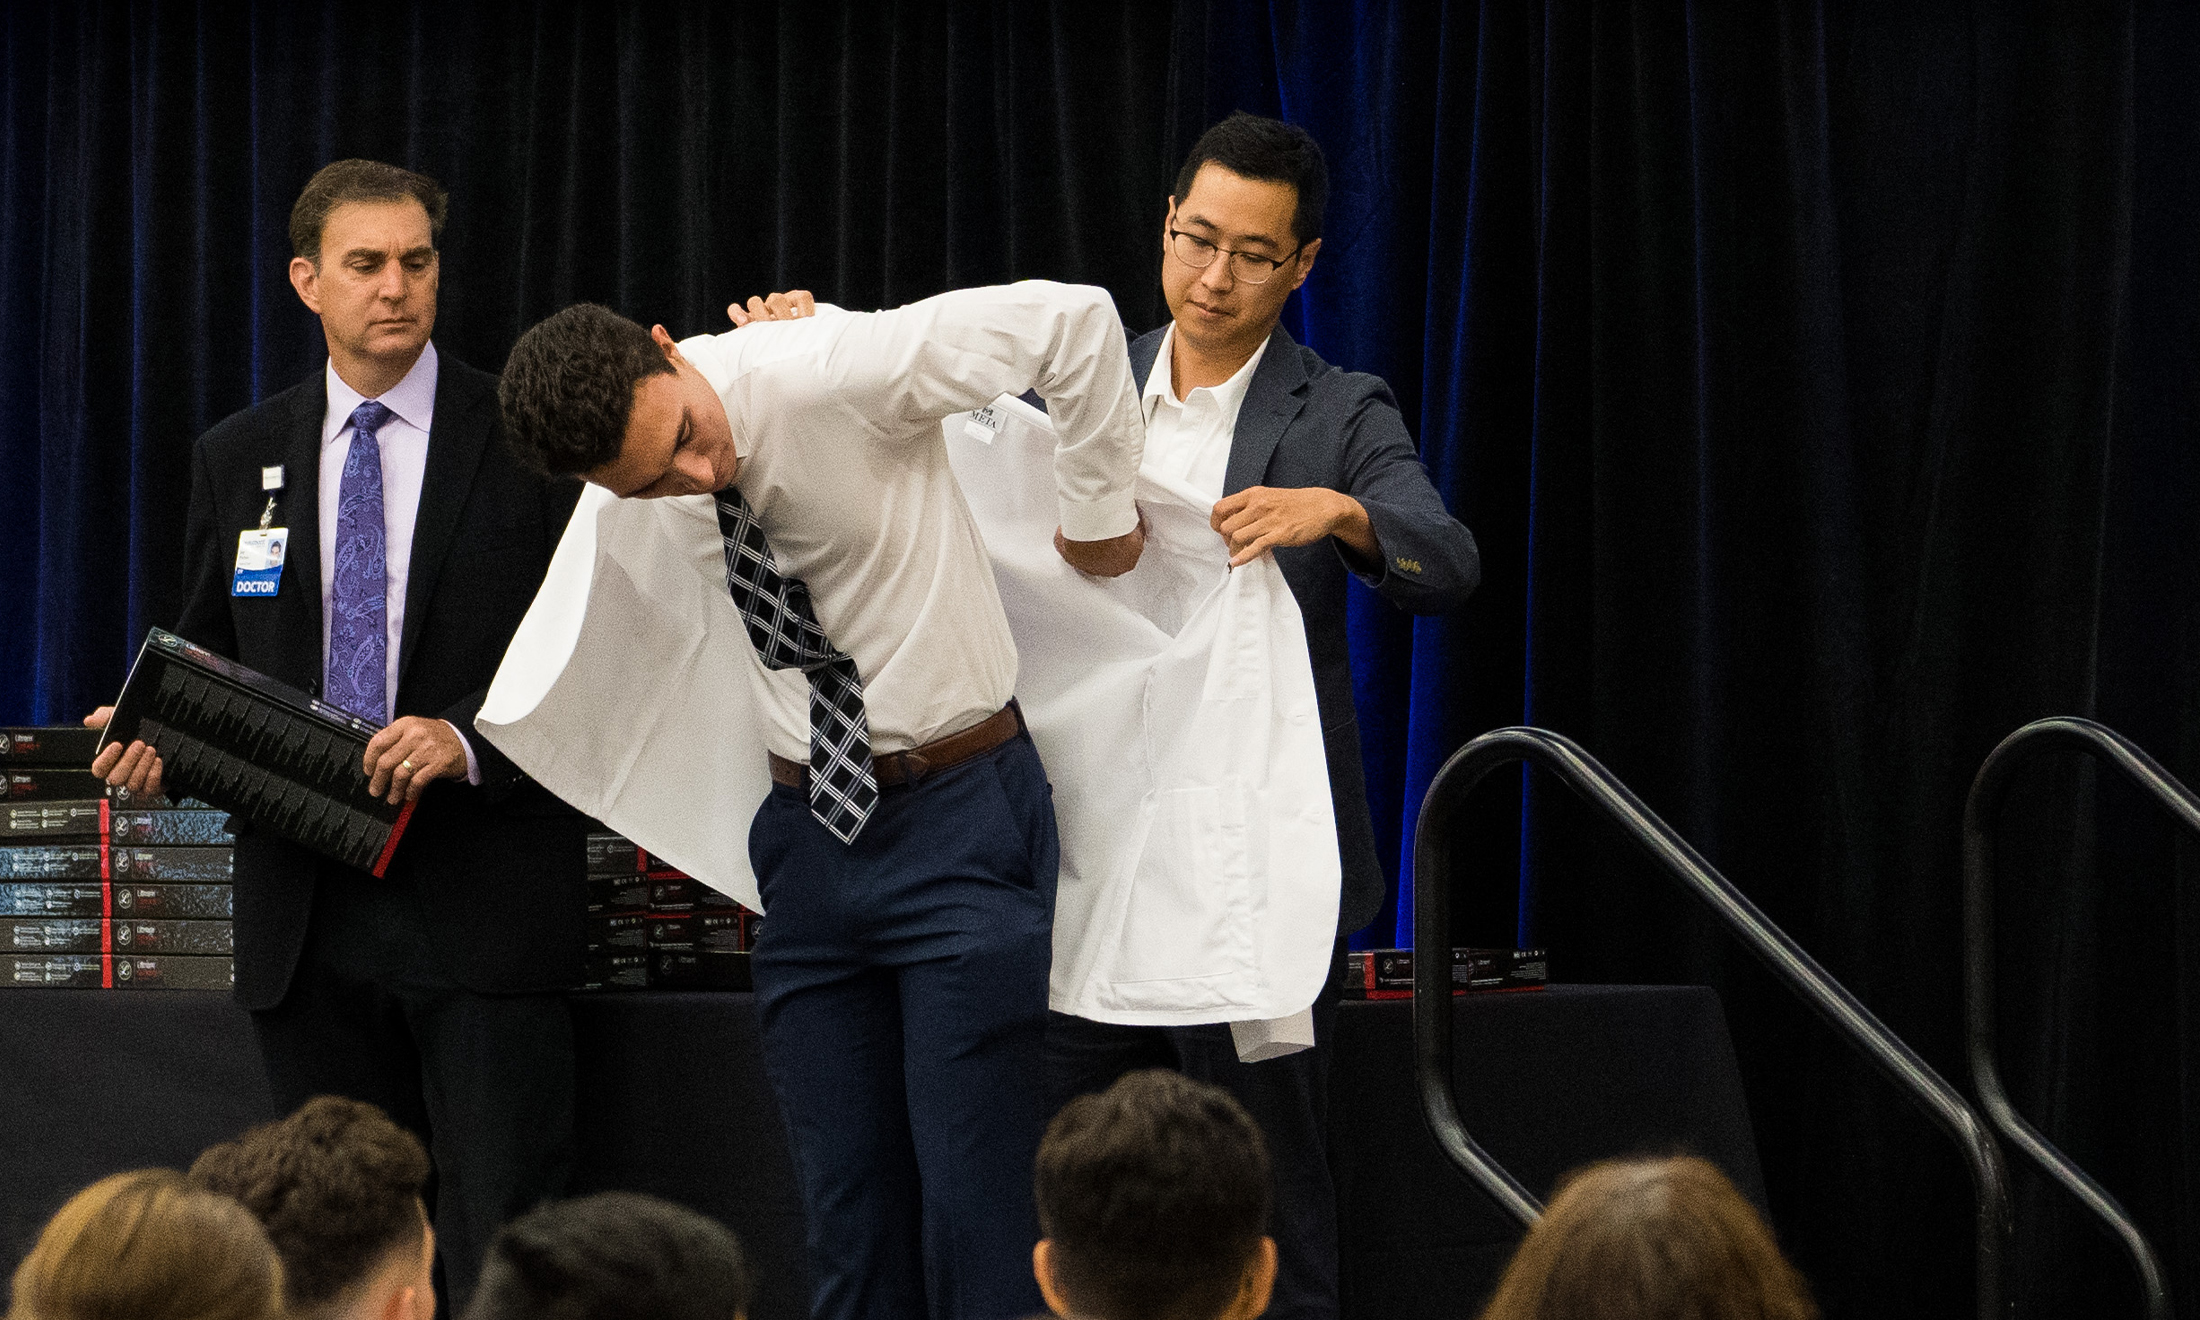 An image of a student getting a white coat